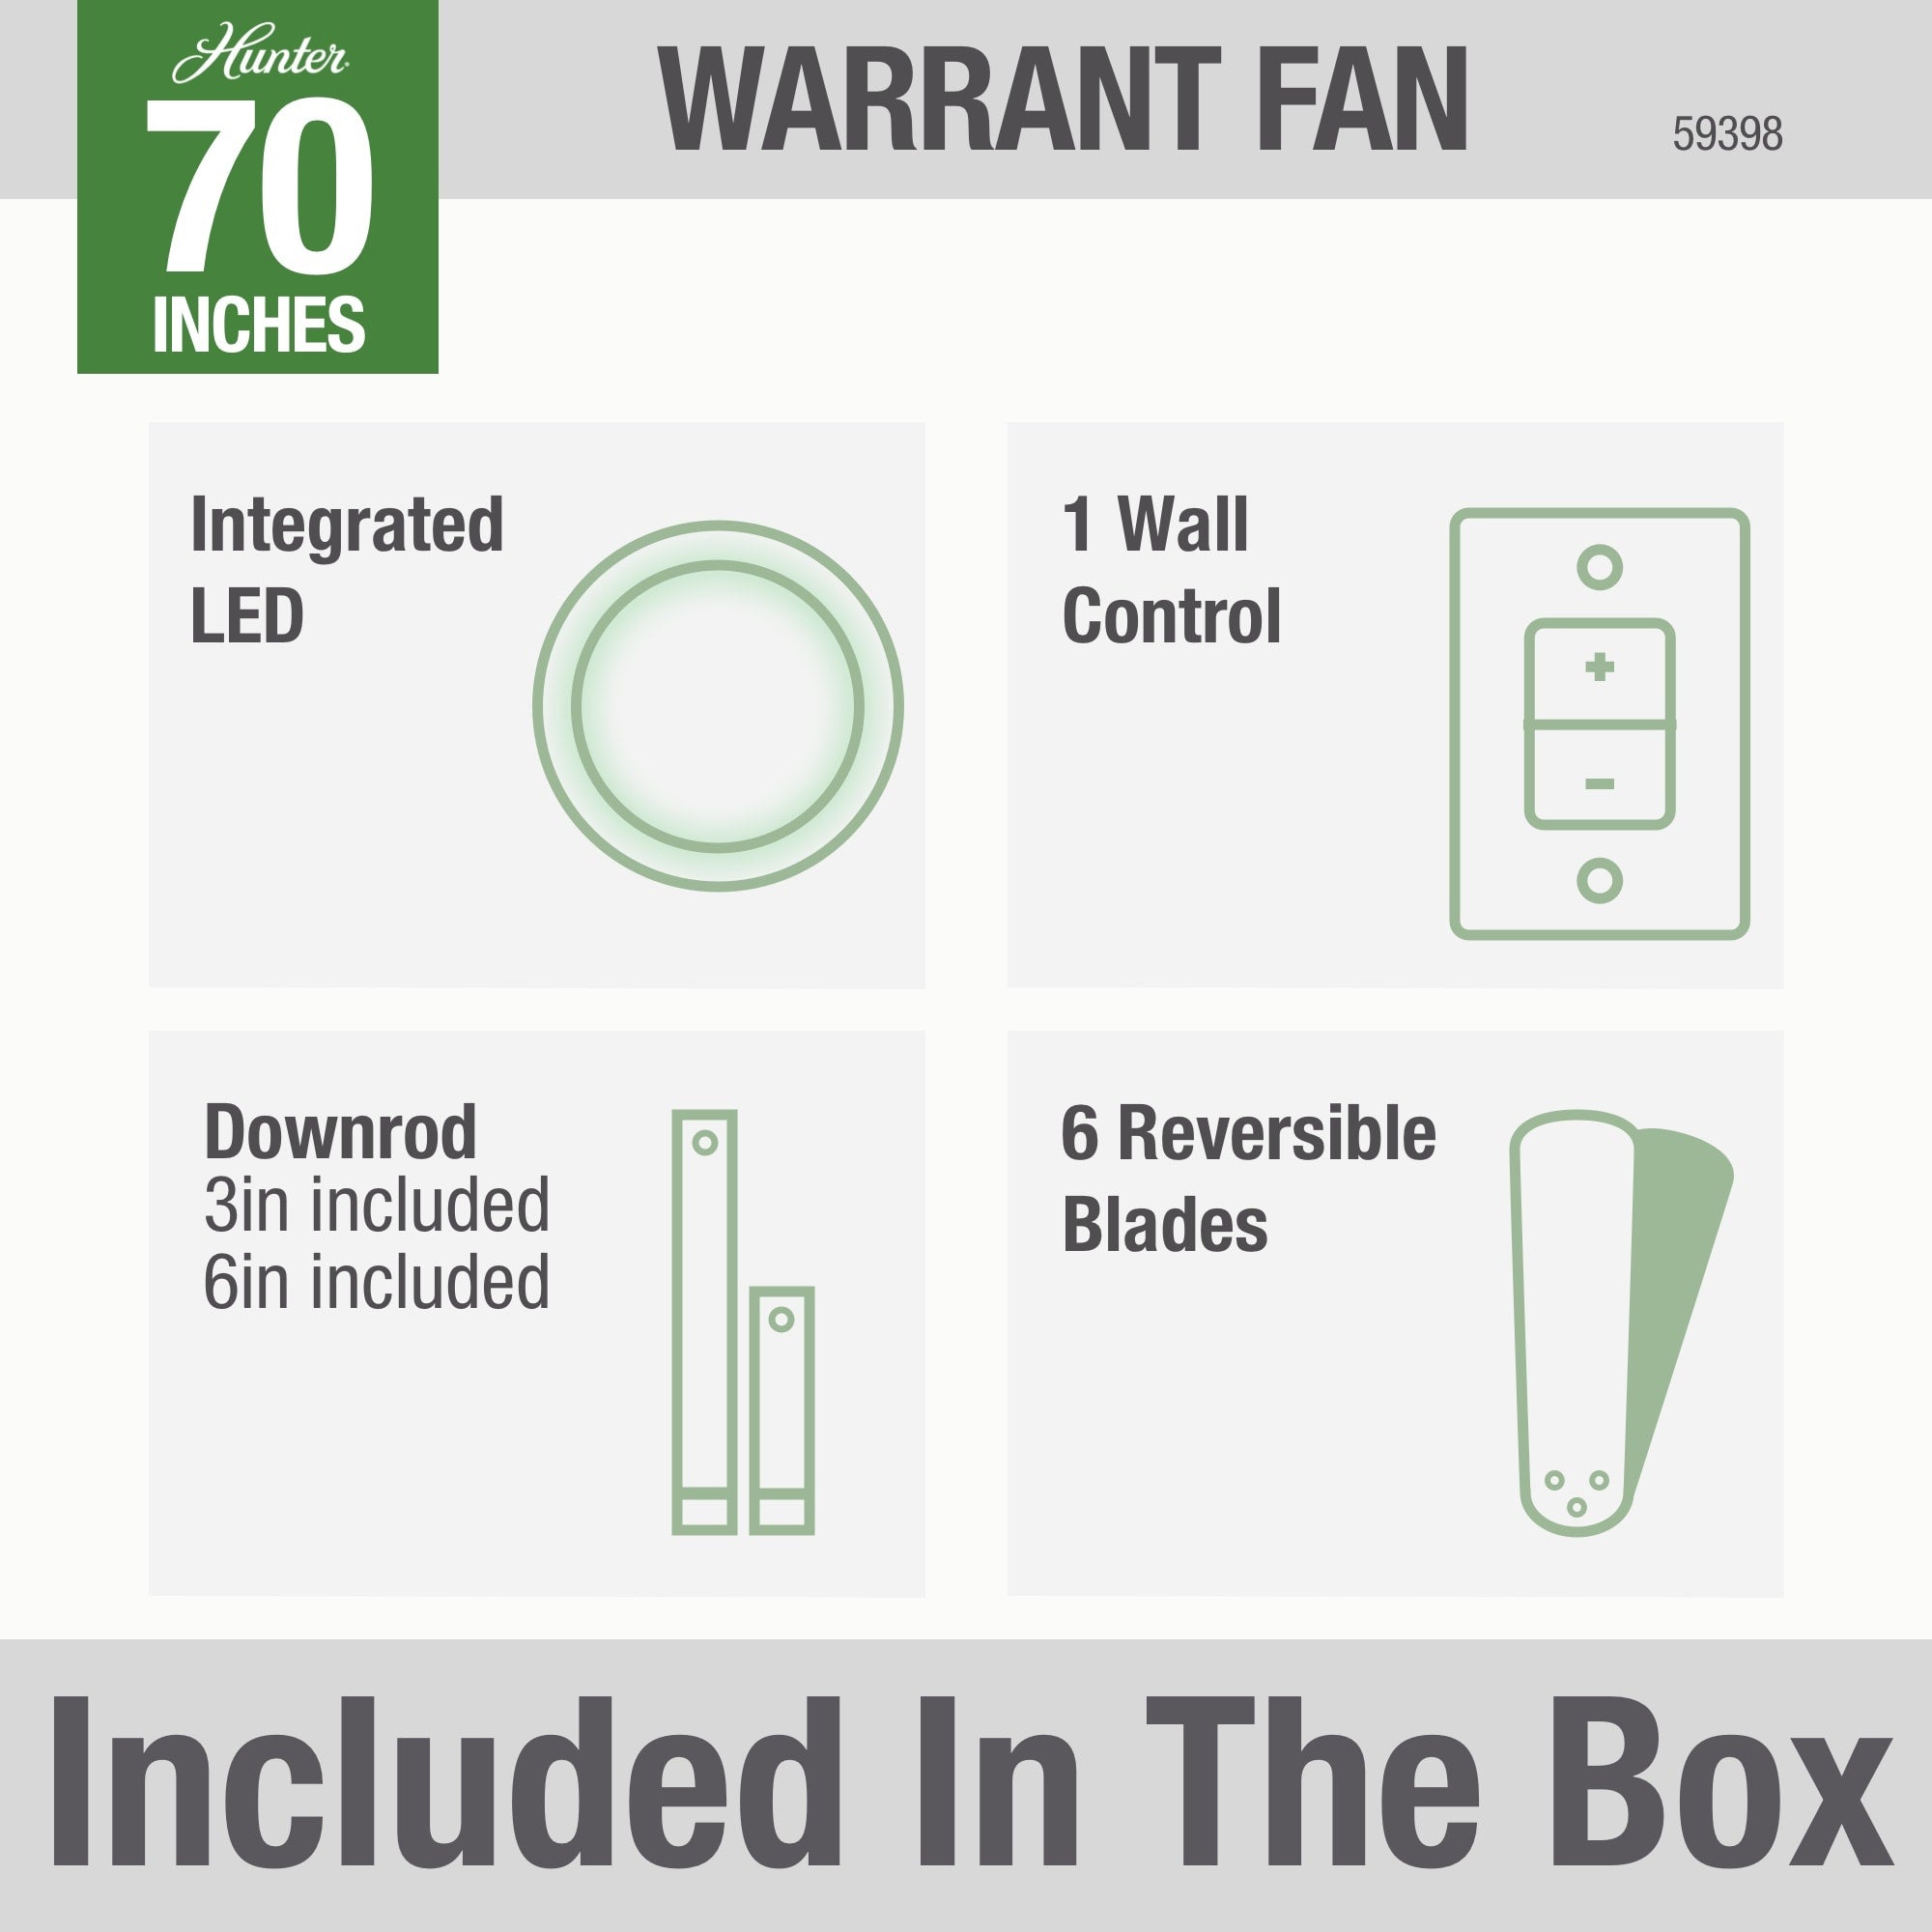 Hunter 70 inch Warrant Ceiling Fan with LED Light Kit and Wall Control